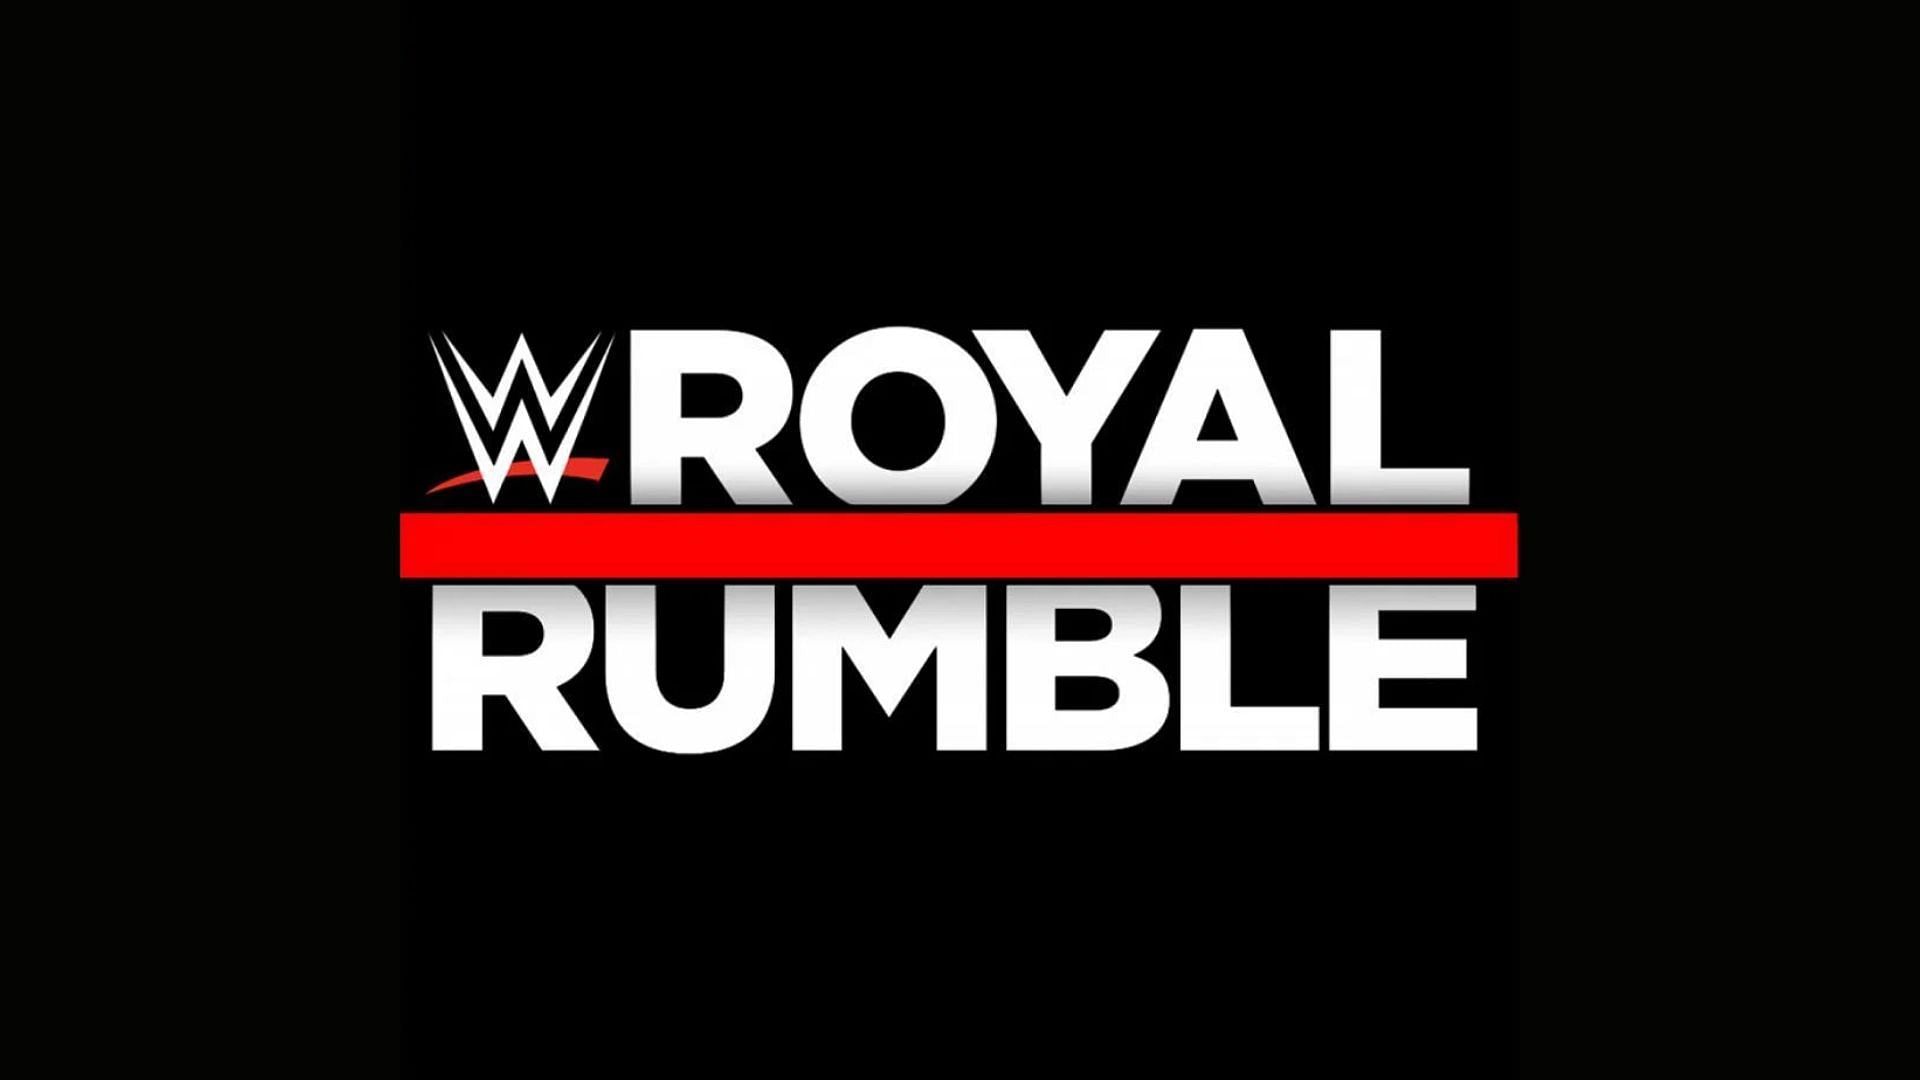 The 2022 Royal Rumble could have featured another returning superstar.